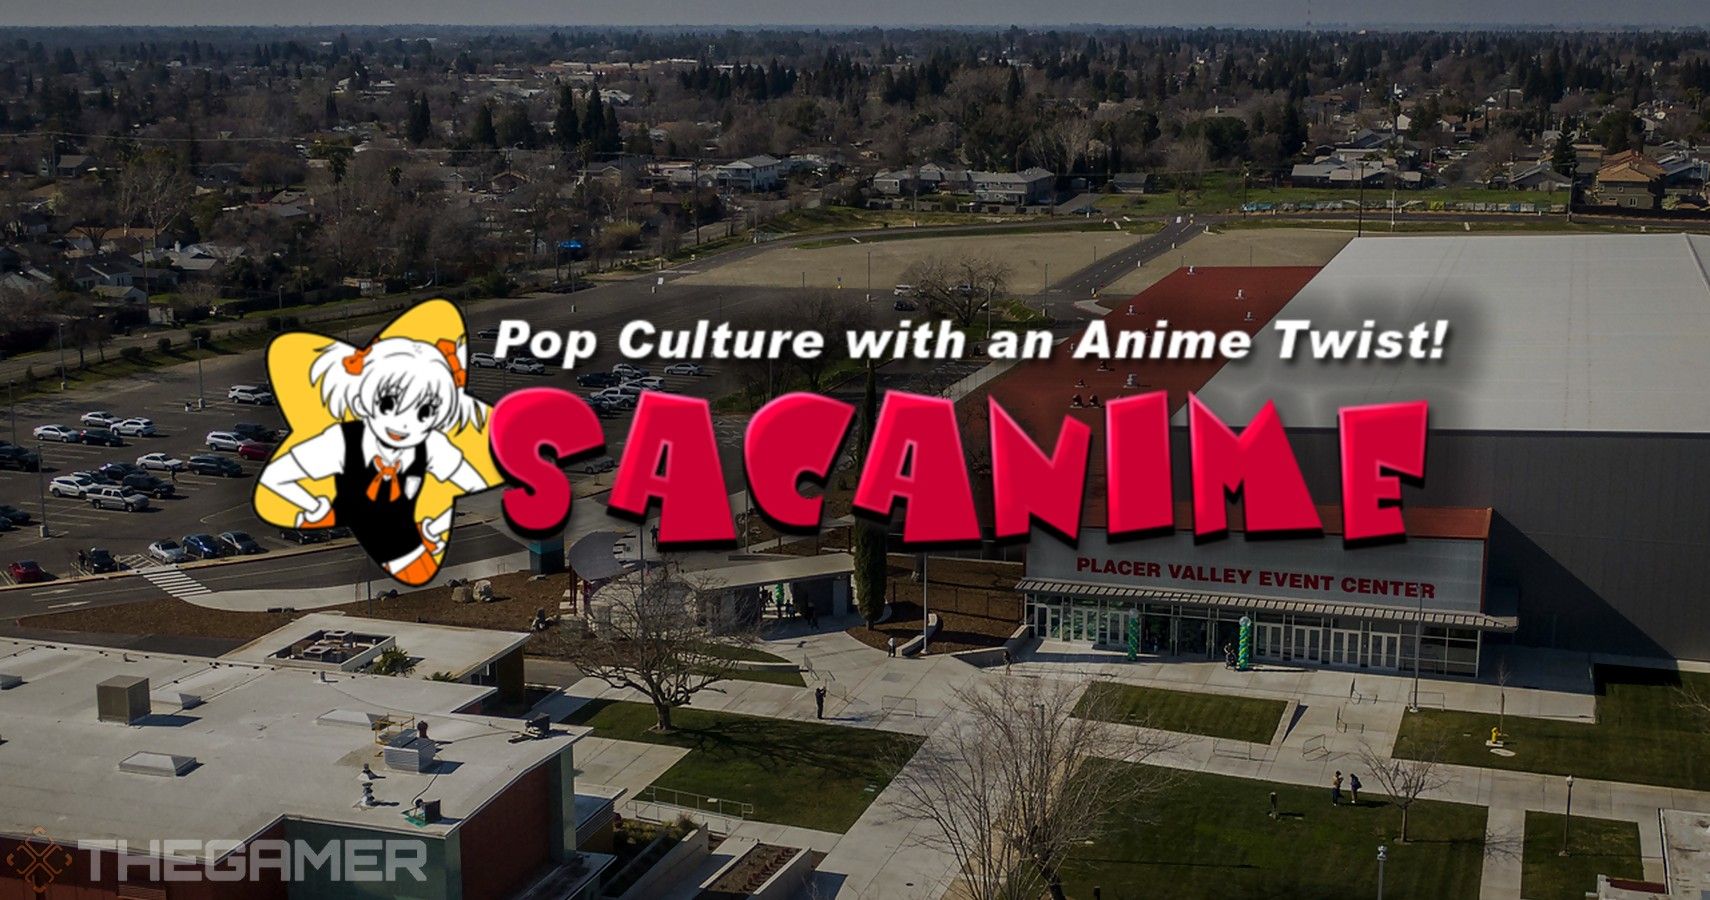 Location of the SacAnime Convention